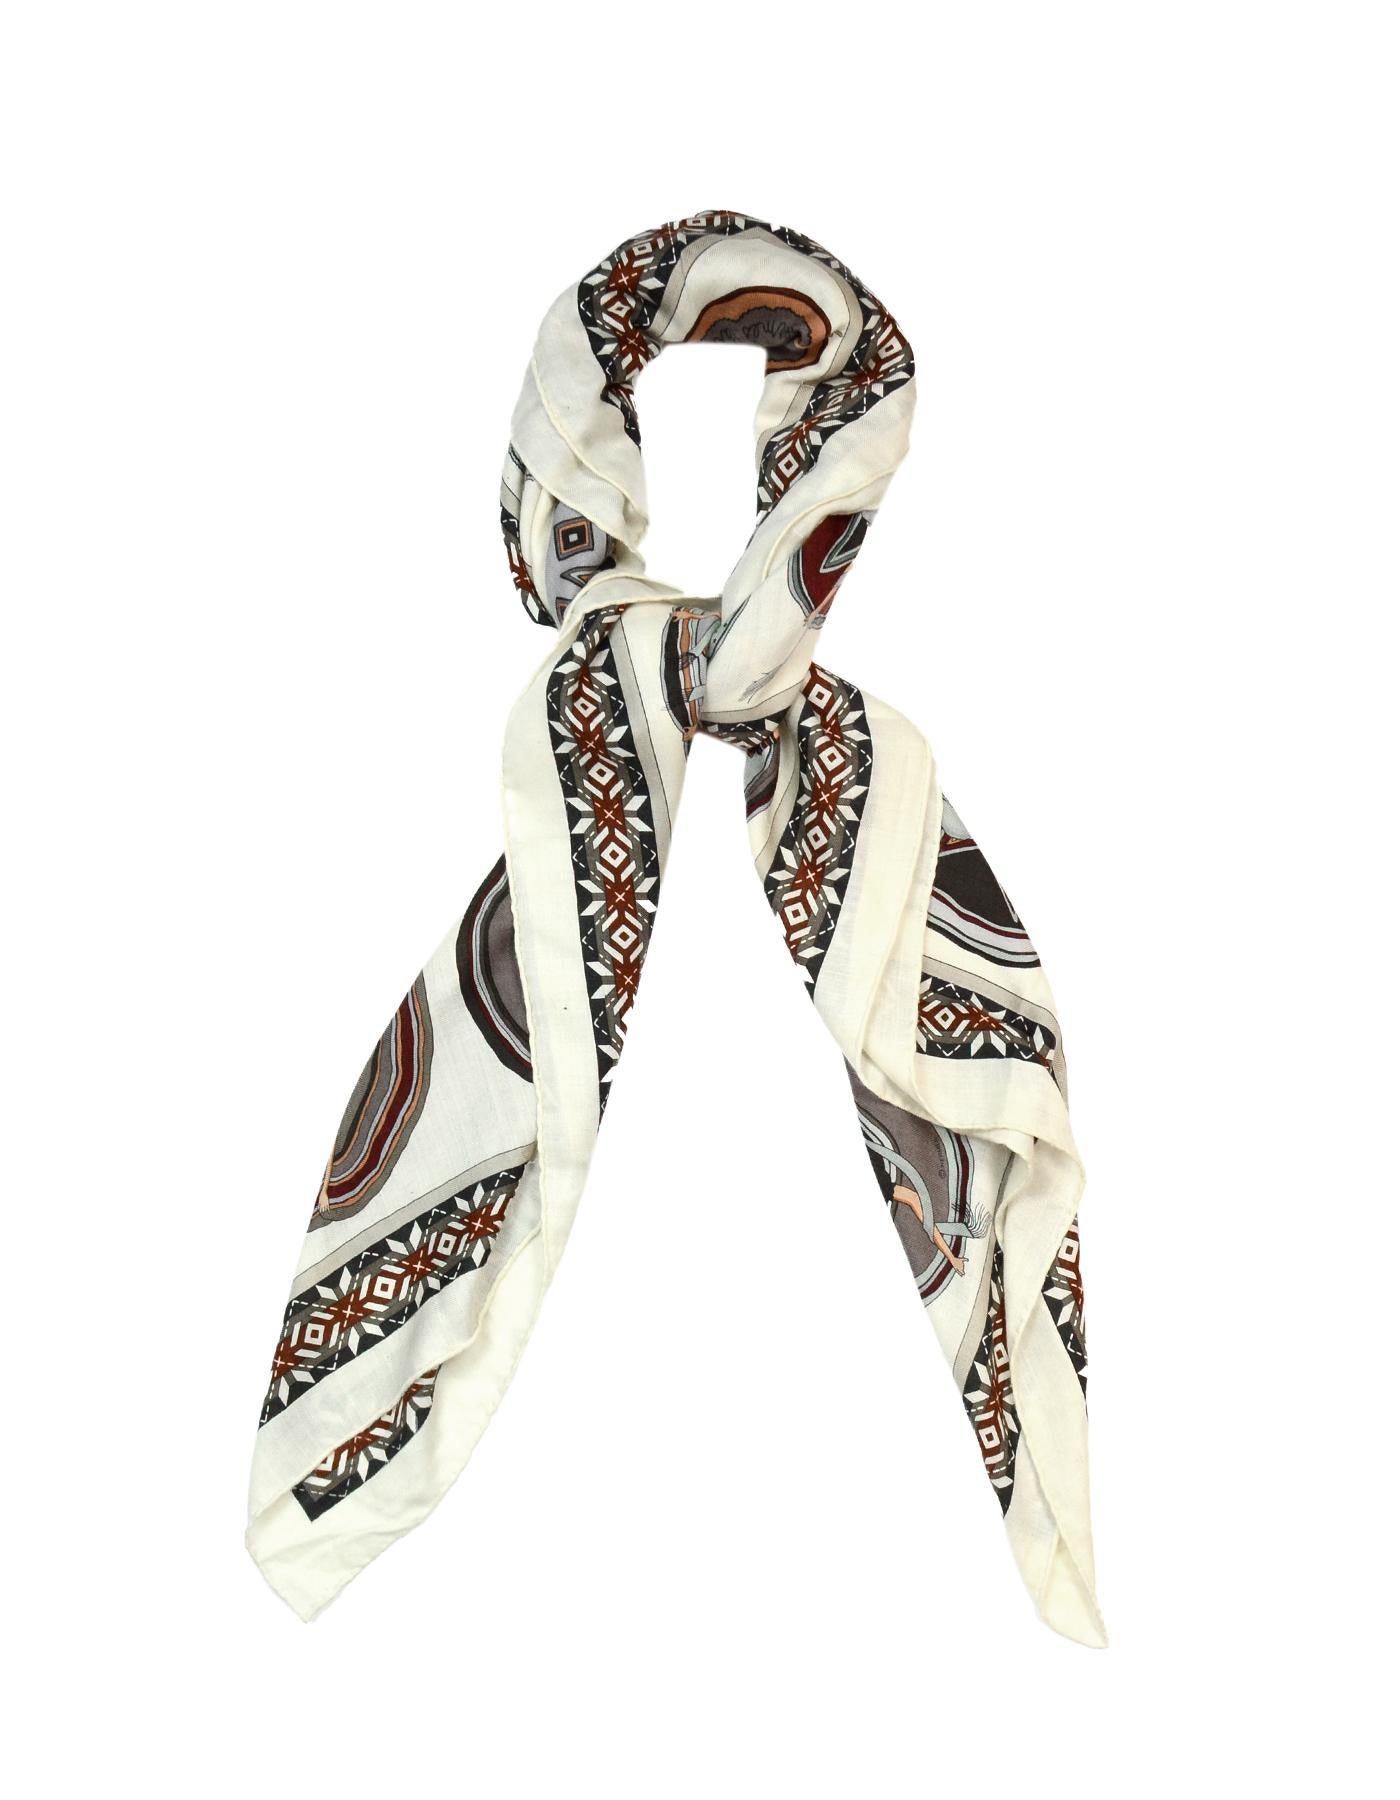 Hermes Ivory Belles Du Mexique Silk/Cashmere 140 Shawl

Made In:  France
Color: Ivory, grey, brown
Materials: Silk, cashmere (no composition tag)
Overall Condition: Good pre-owned condition with exception of some pulls in the fabric
Estimated